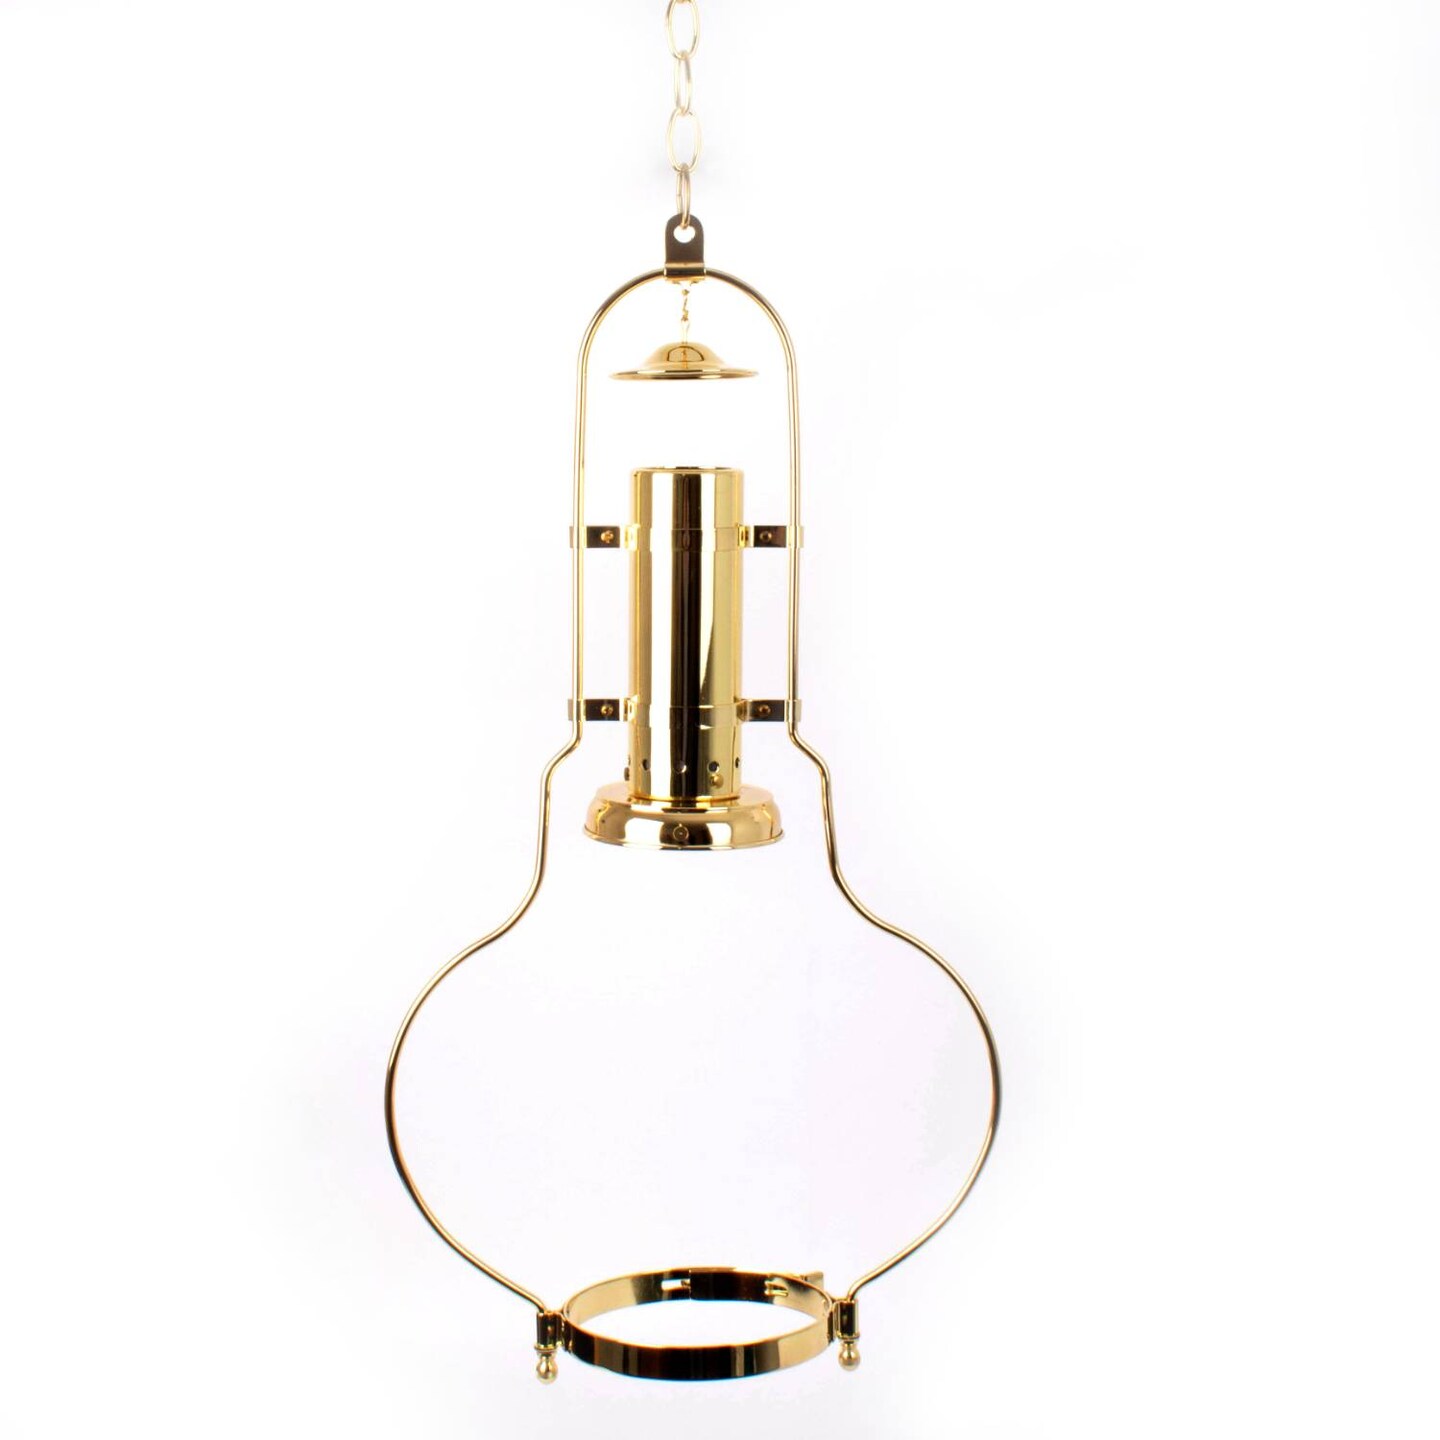 Aladdin Oil Lamp Hanging Frame, BH210 Solid Brass Deluxe Replacement Frame, Fits Aladdin Hanging Brass Chandelier Lamps